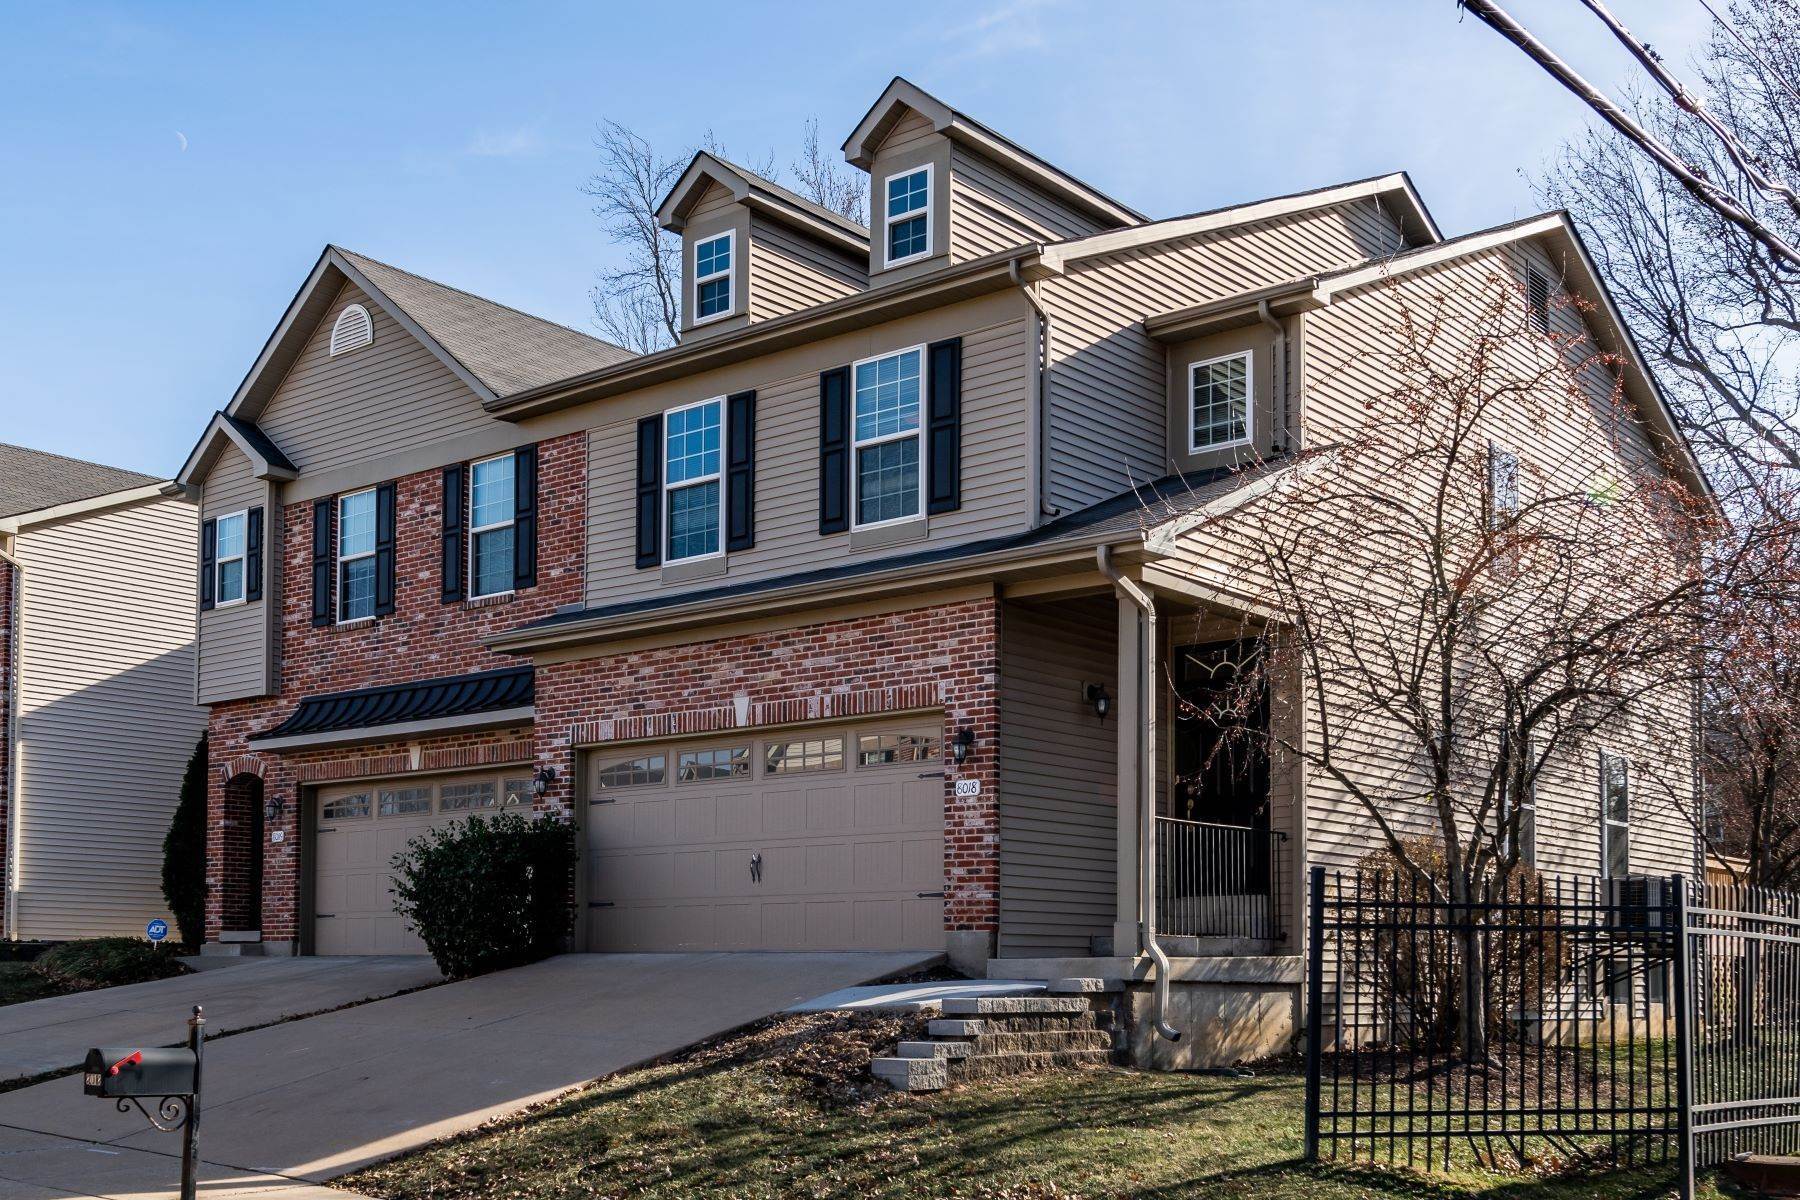 Condominiums for Sale at Carefree Living in Fabulous Townhome 8018 #B Presidio Court University City, Missouri 63130 United States